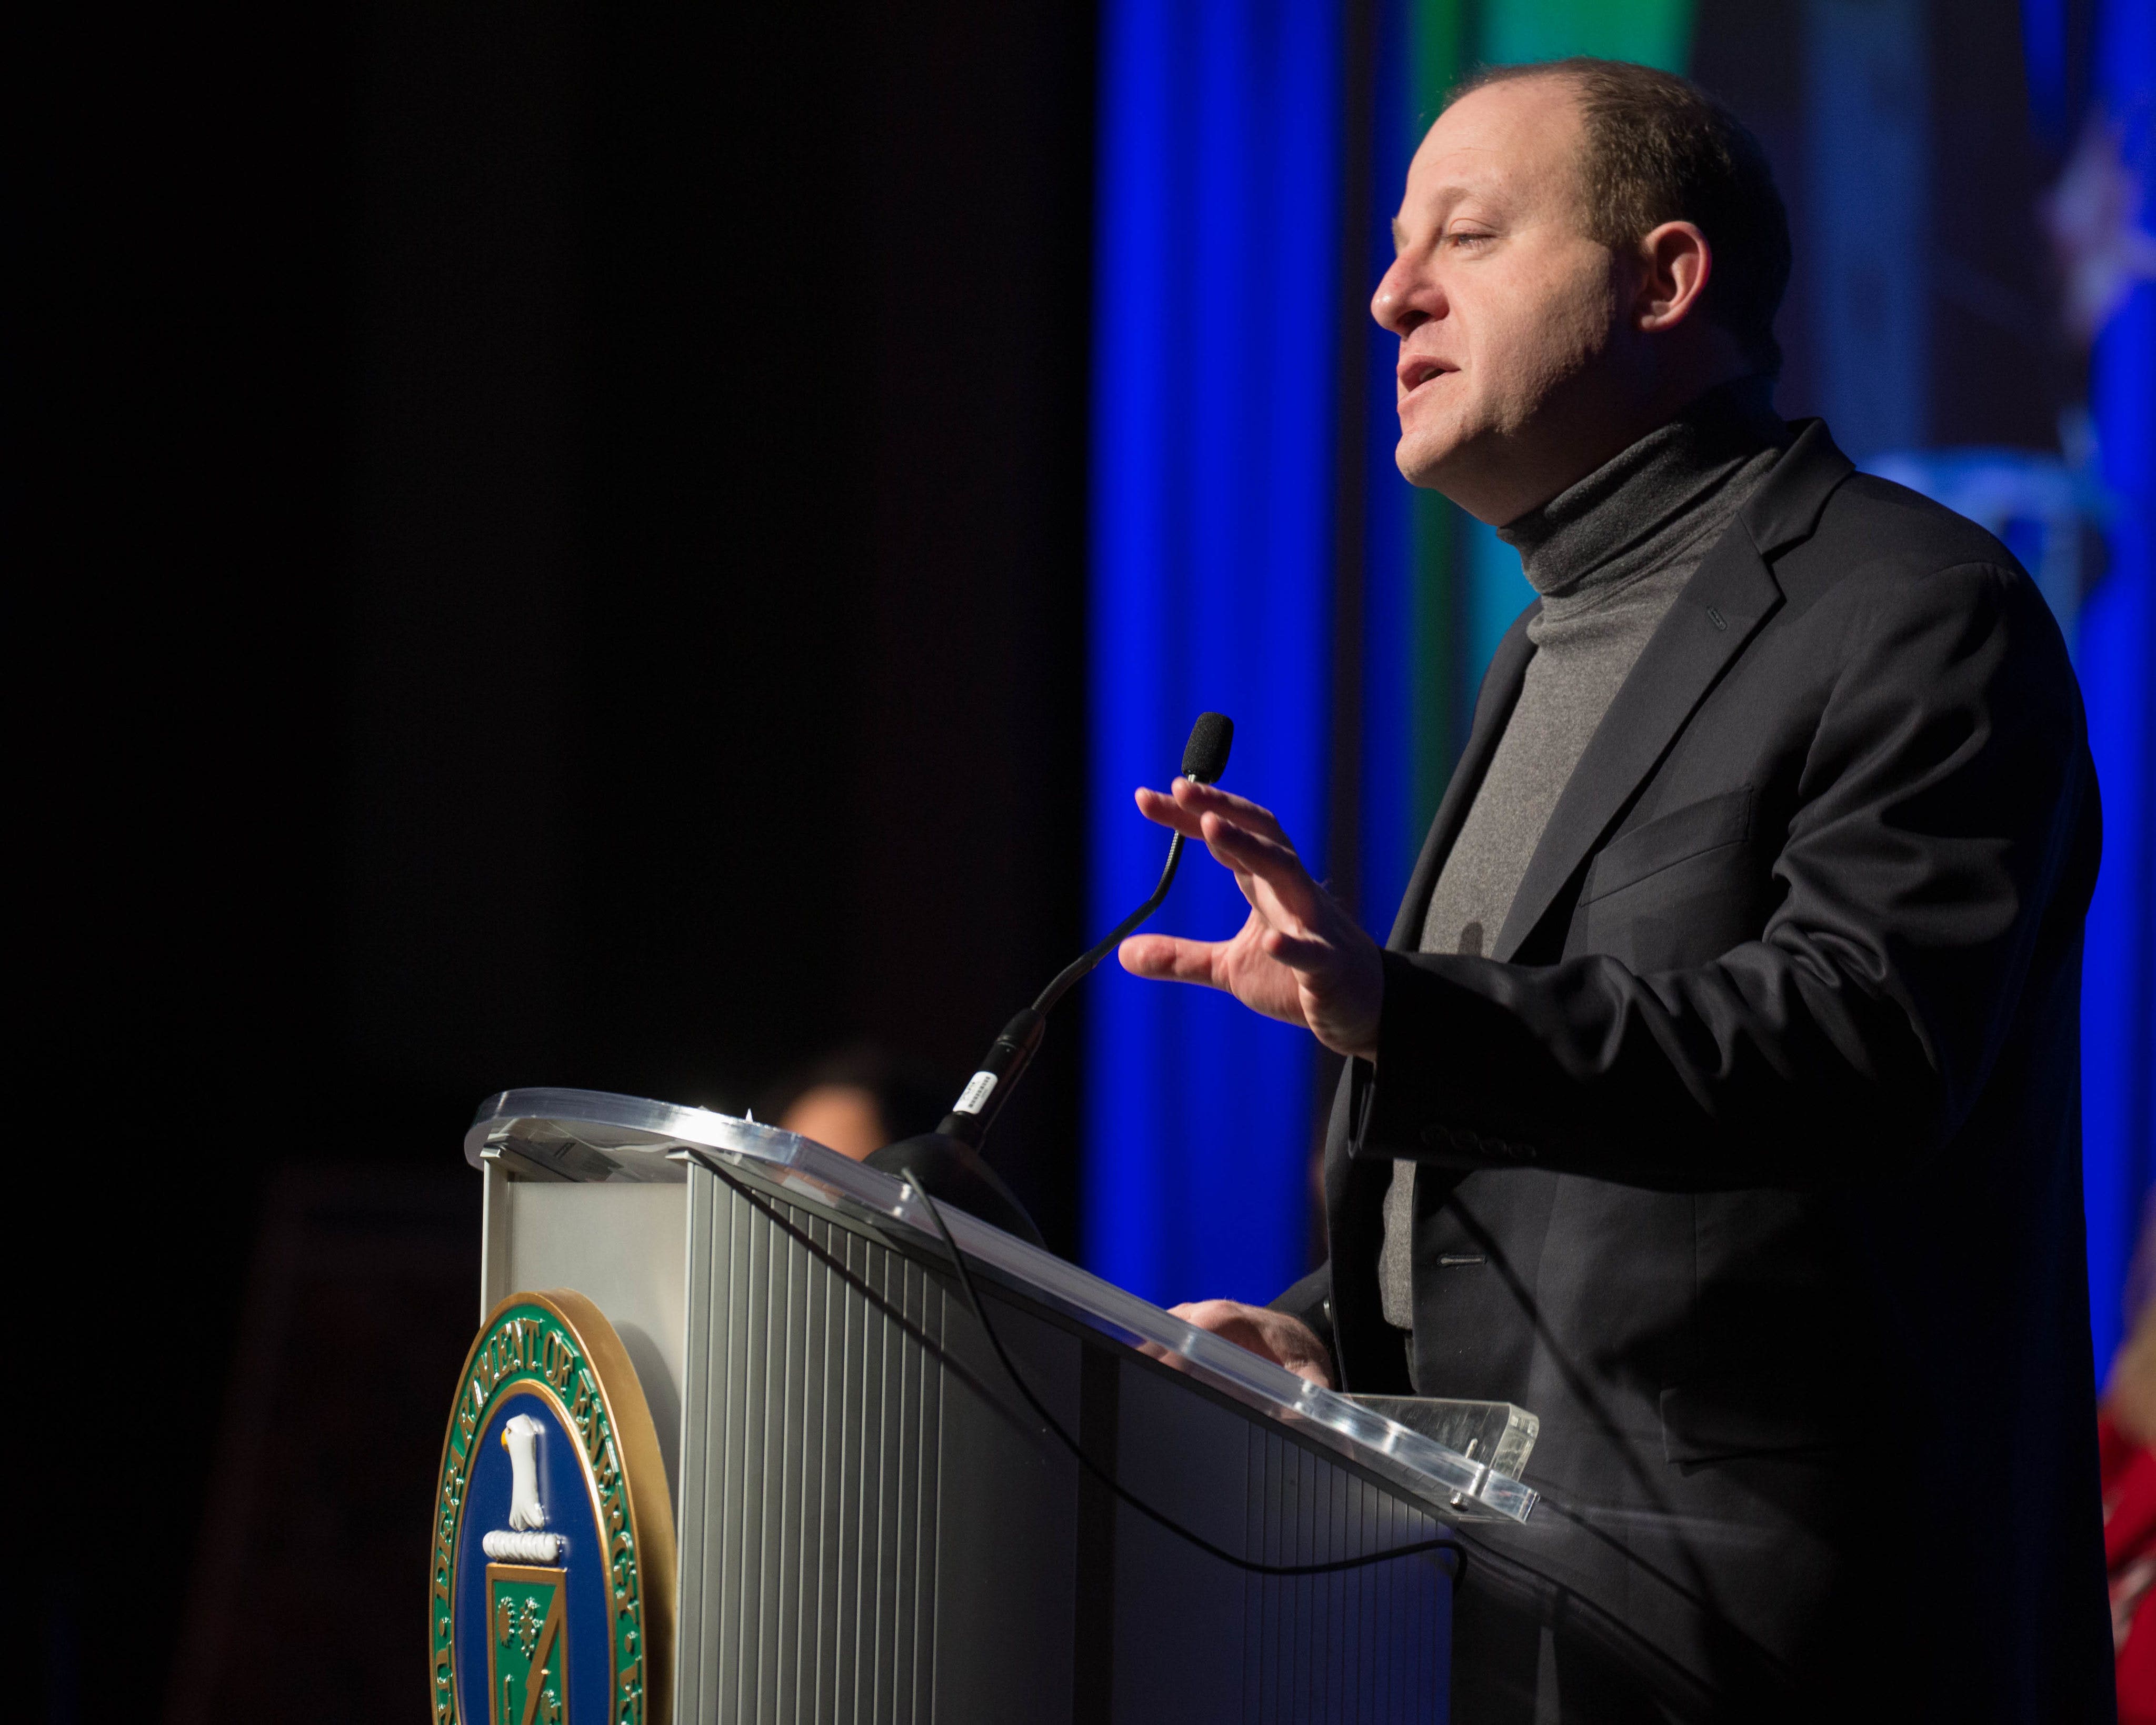 Colorado Gov Jared Polis Shares Support For Psychedelics Reform, Says Prohibition Inhibits Research